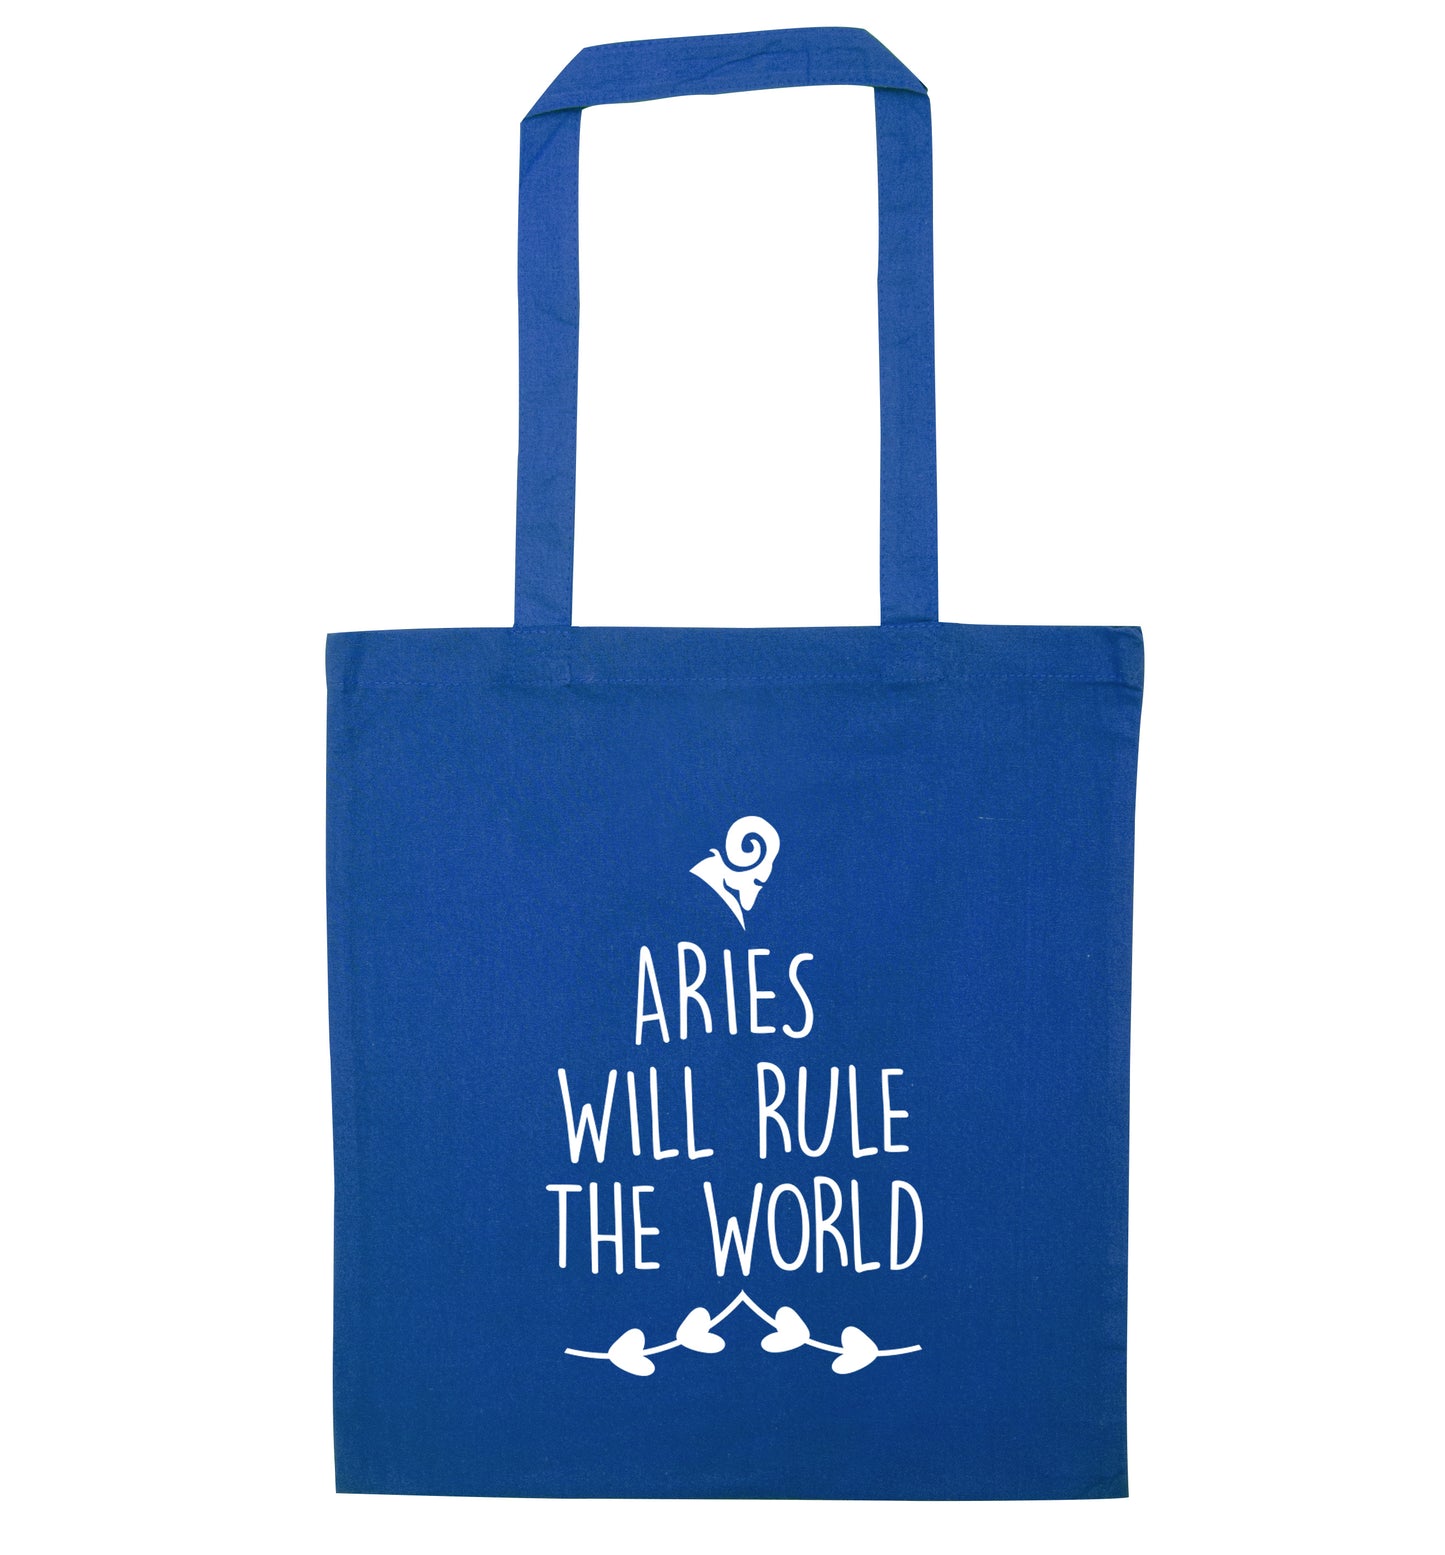 Aries will rule the world blue tote bag